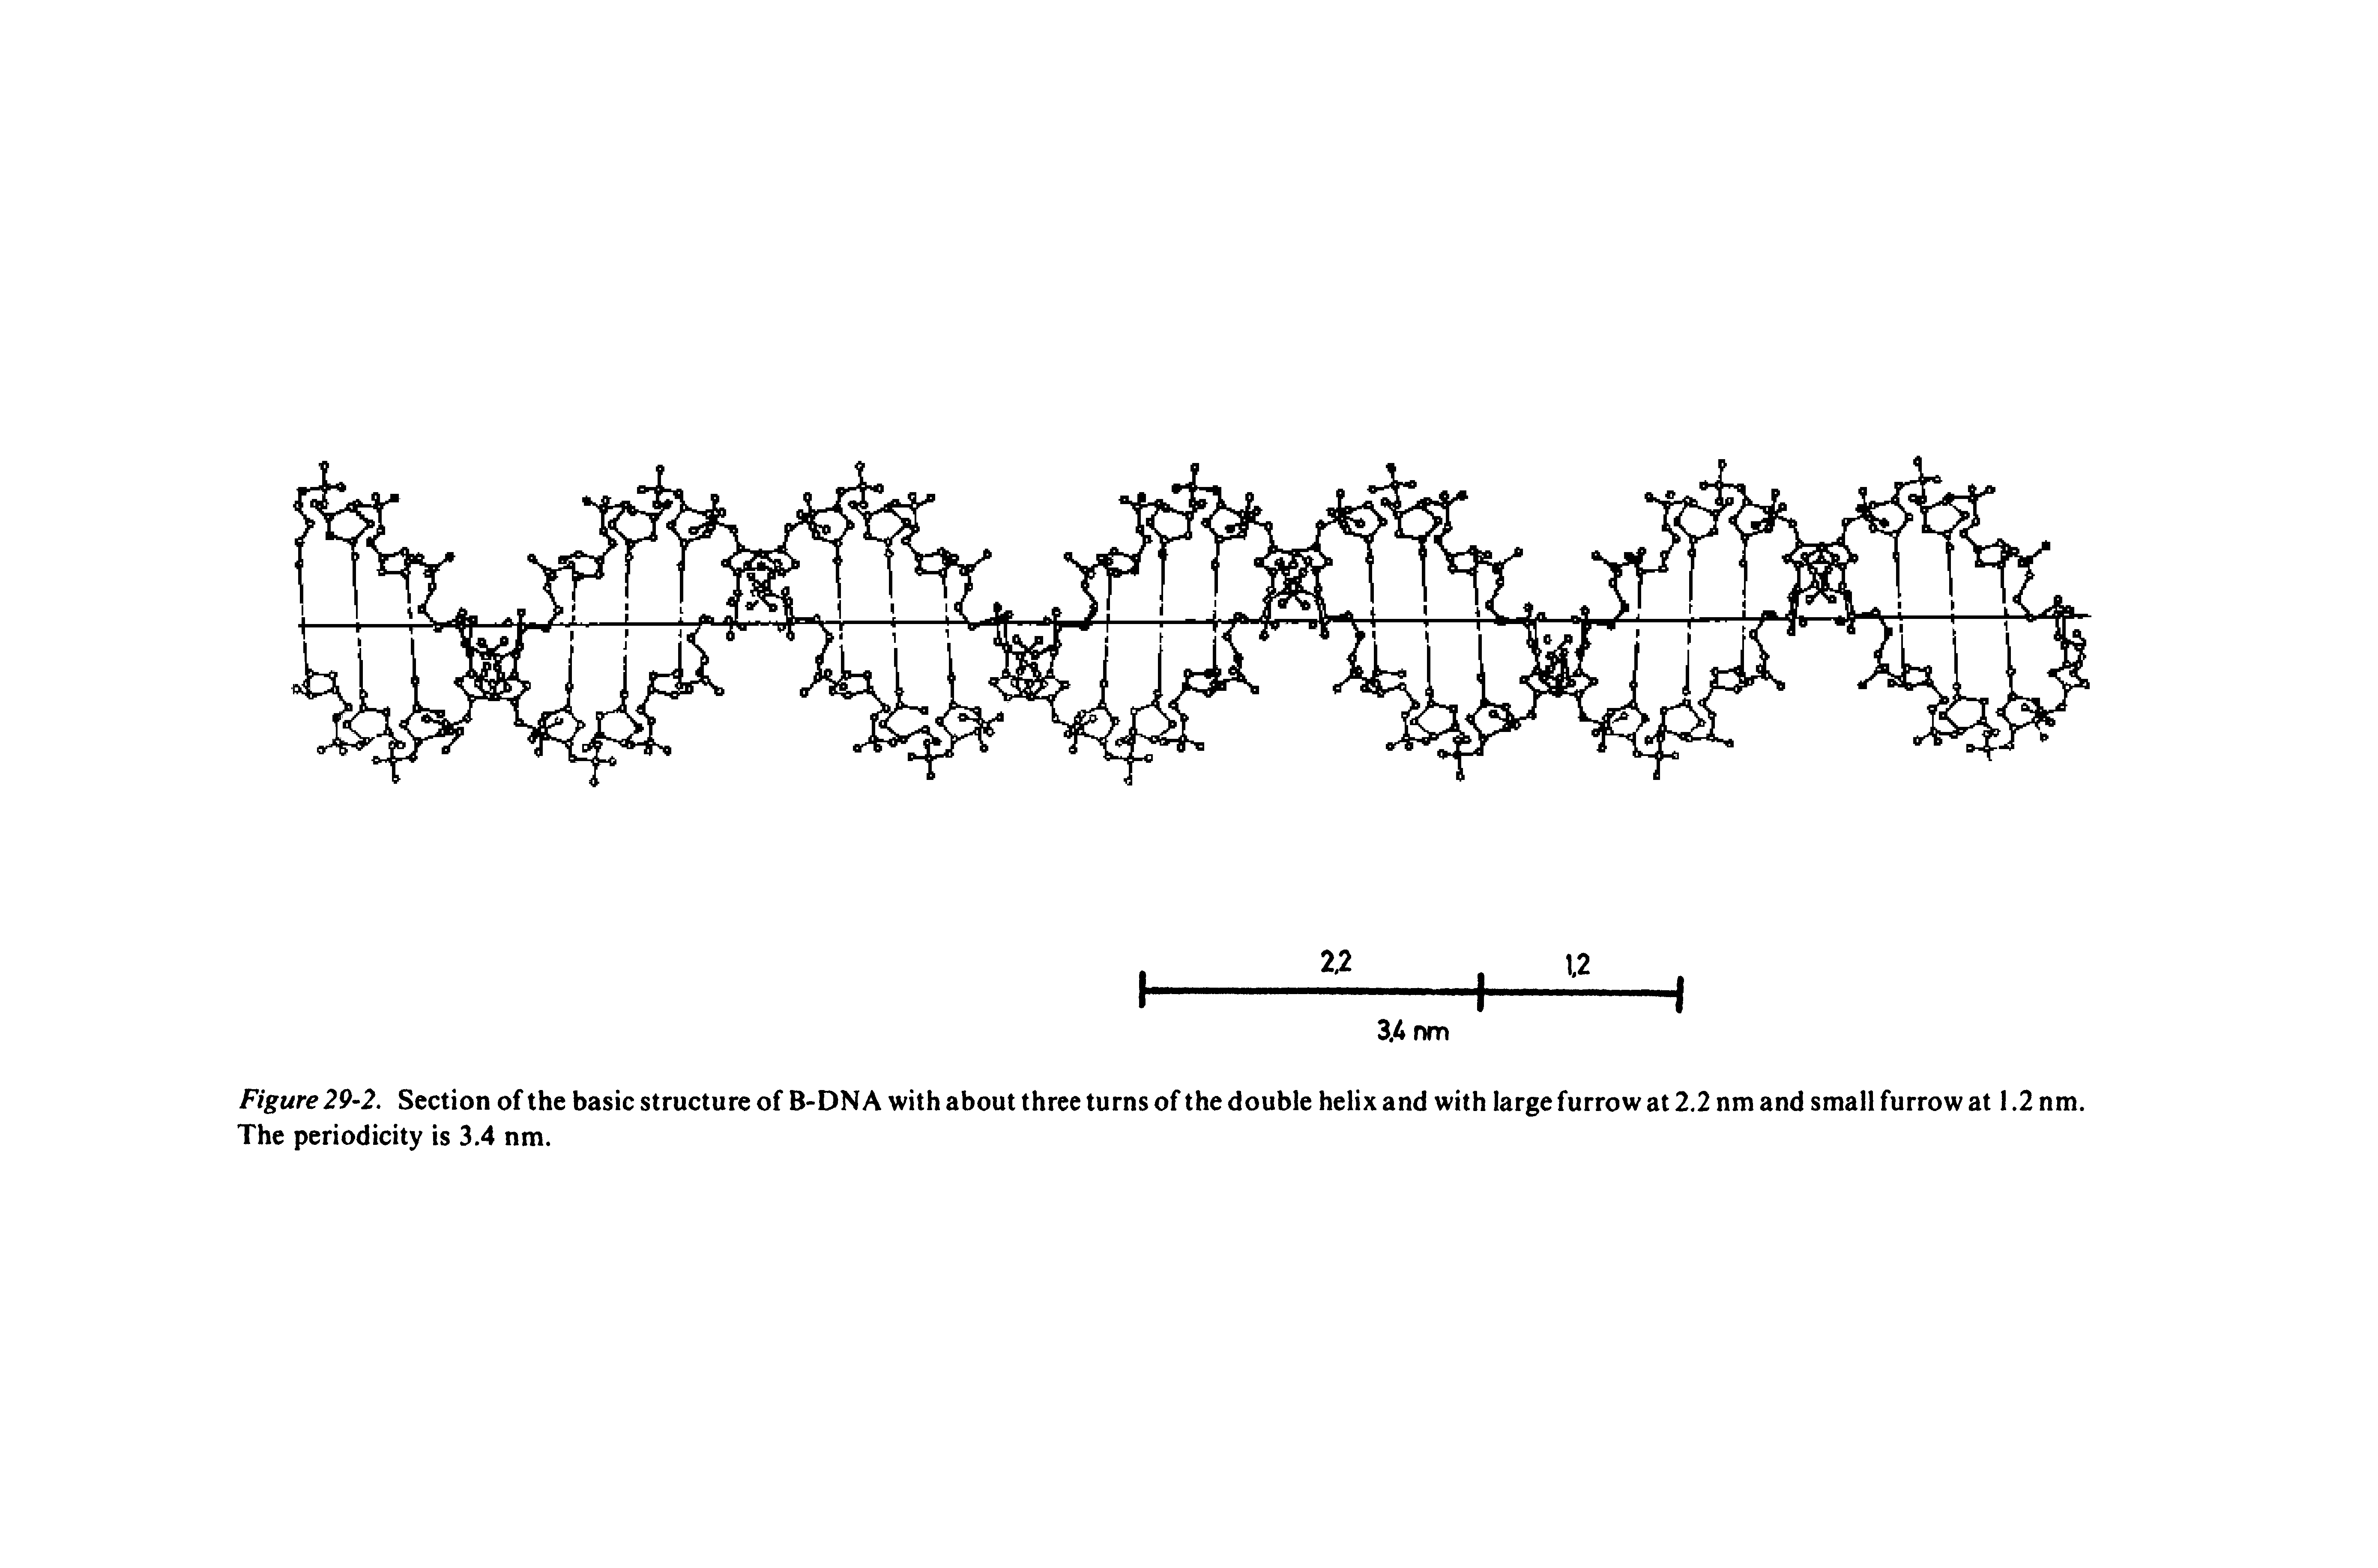 Figure 29-2. Section of the basic structure of B-DNA with about three turns of the double helix and with large furrow at 2.2 nm and small furrow at 1.2 nm. The periodicity is 3.4 nm.